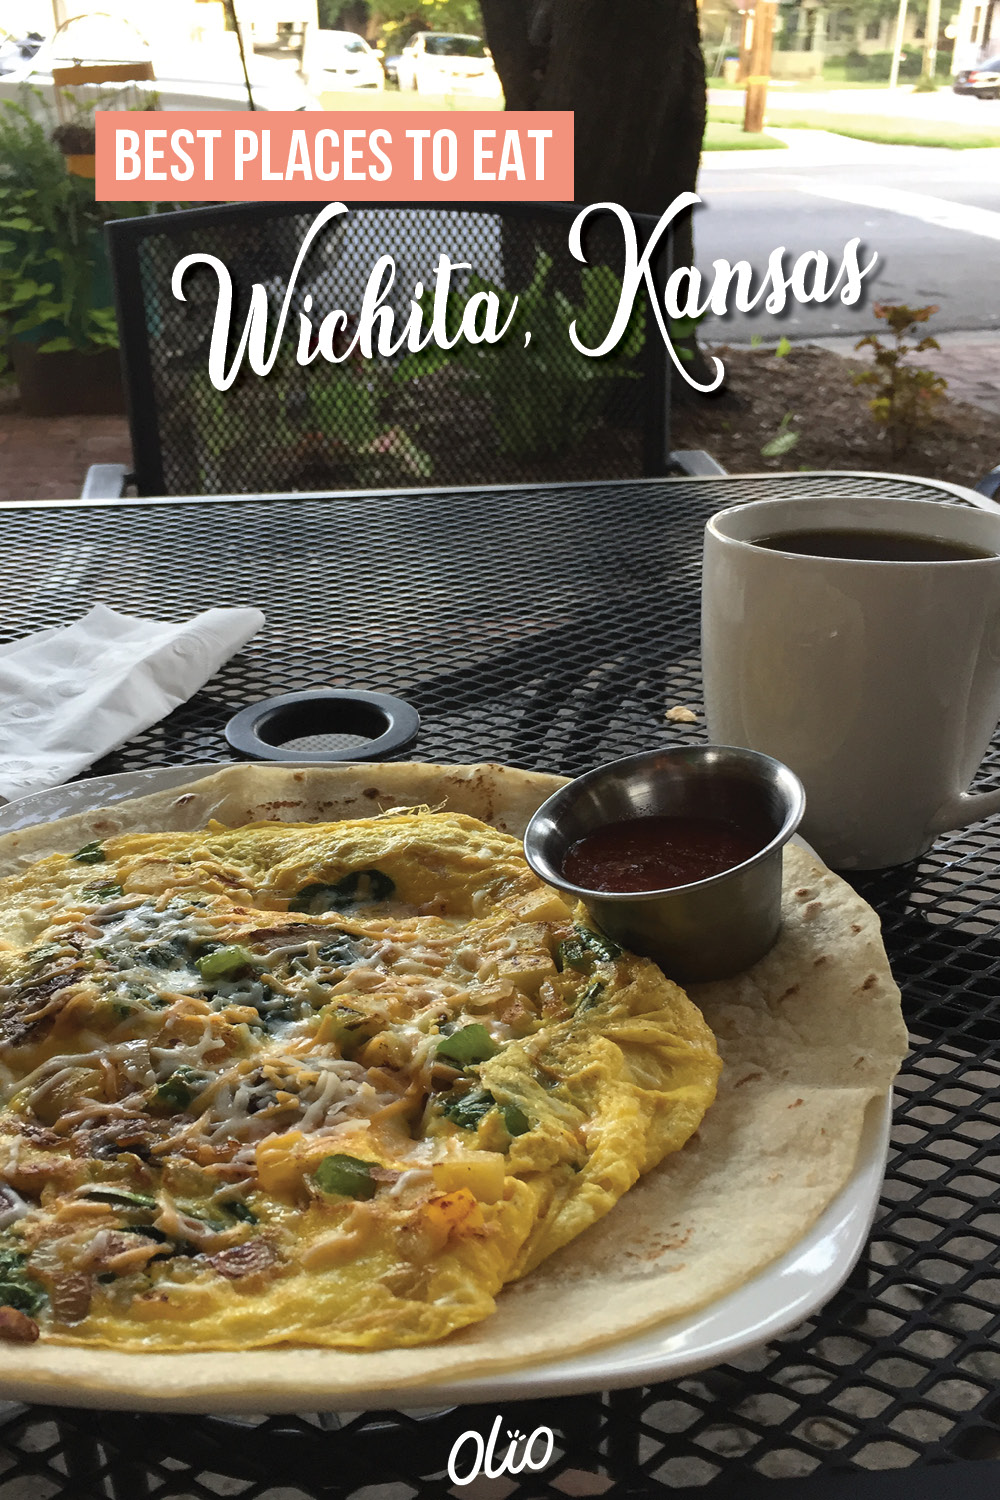 There are so many terrific places to eat in Wichita, Kansas! From decadent dessert shops to cozy coffeeshops and everything in between, there's a restaurant for everyone in this Kansas city. #Wichita #Kansas #Foodie